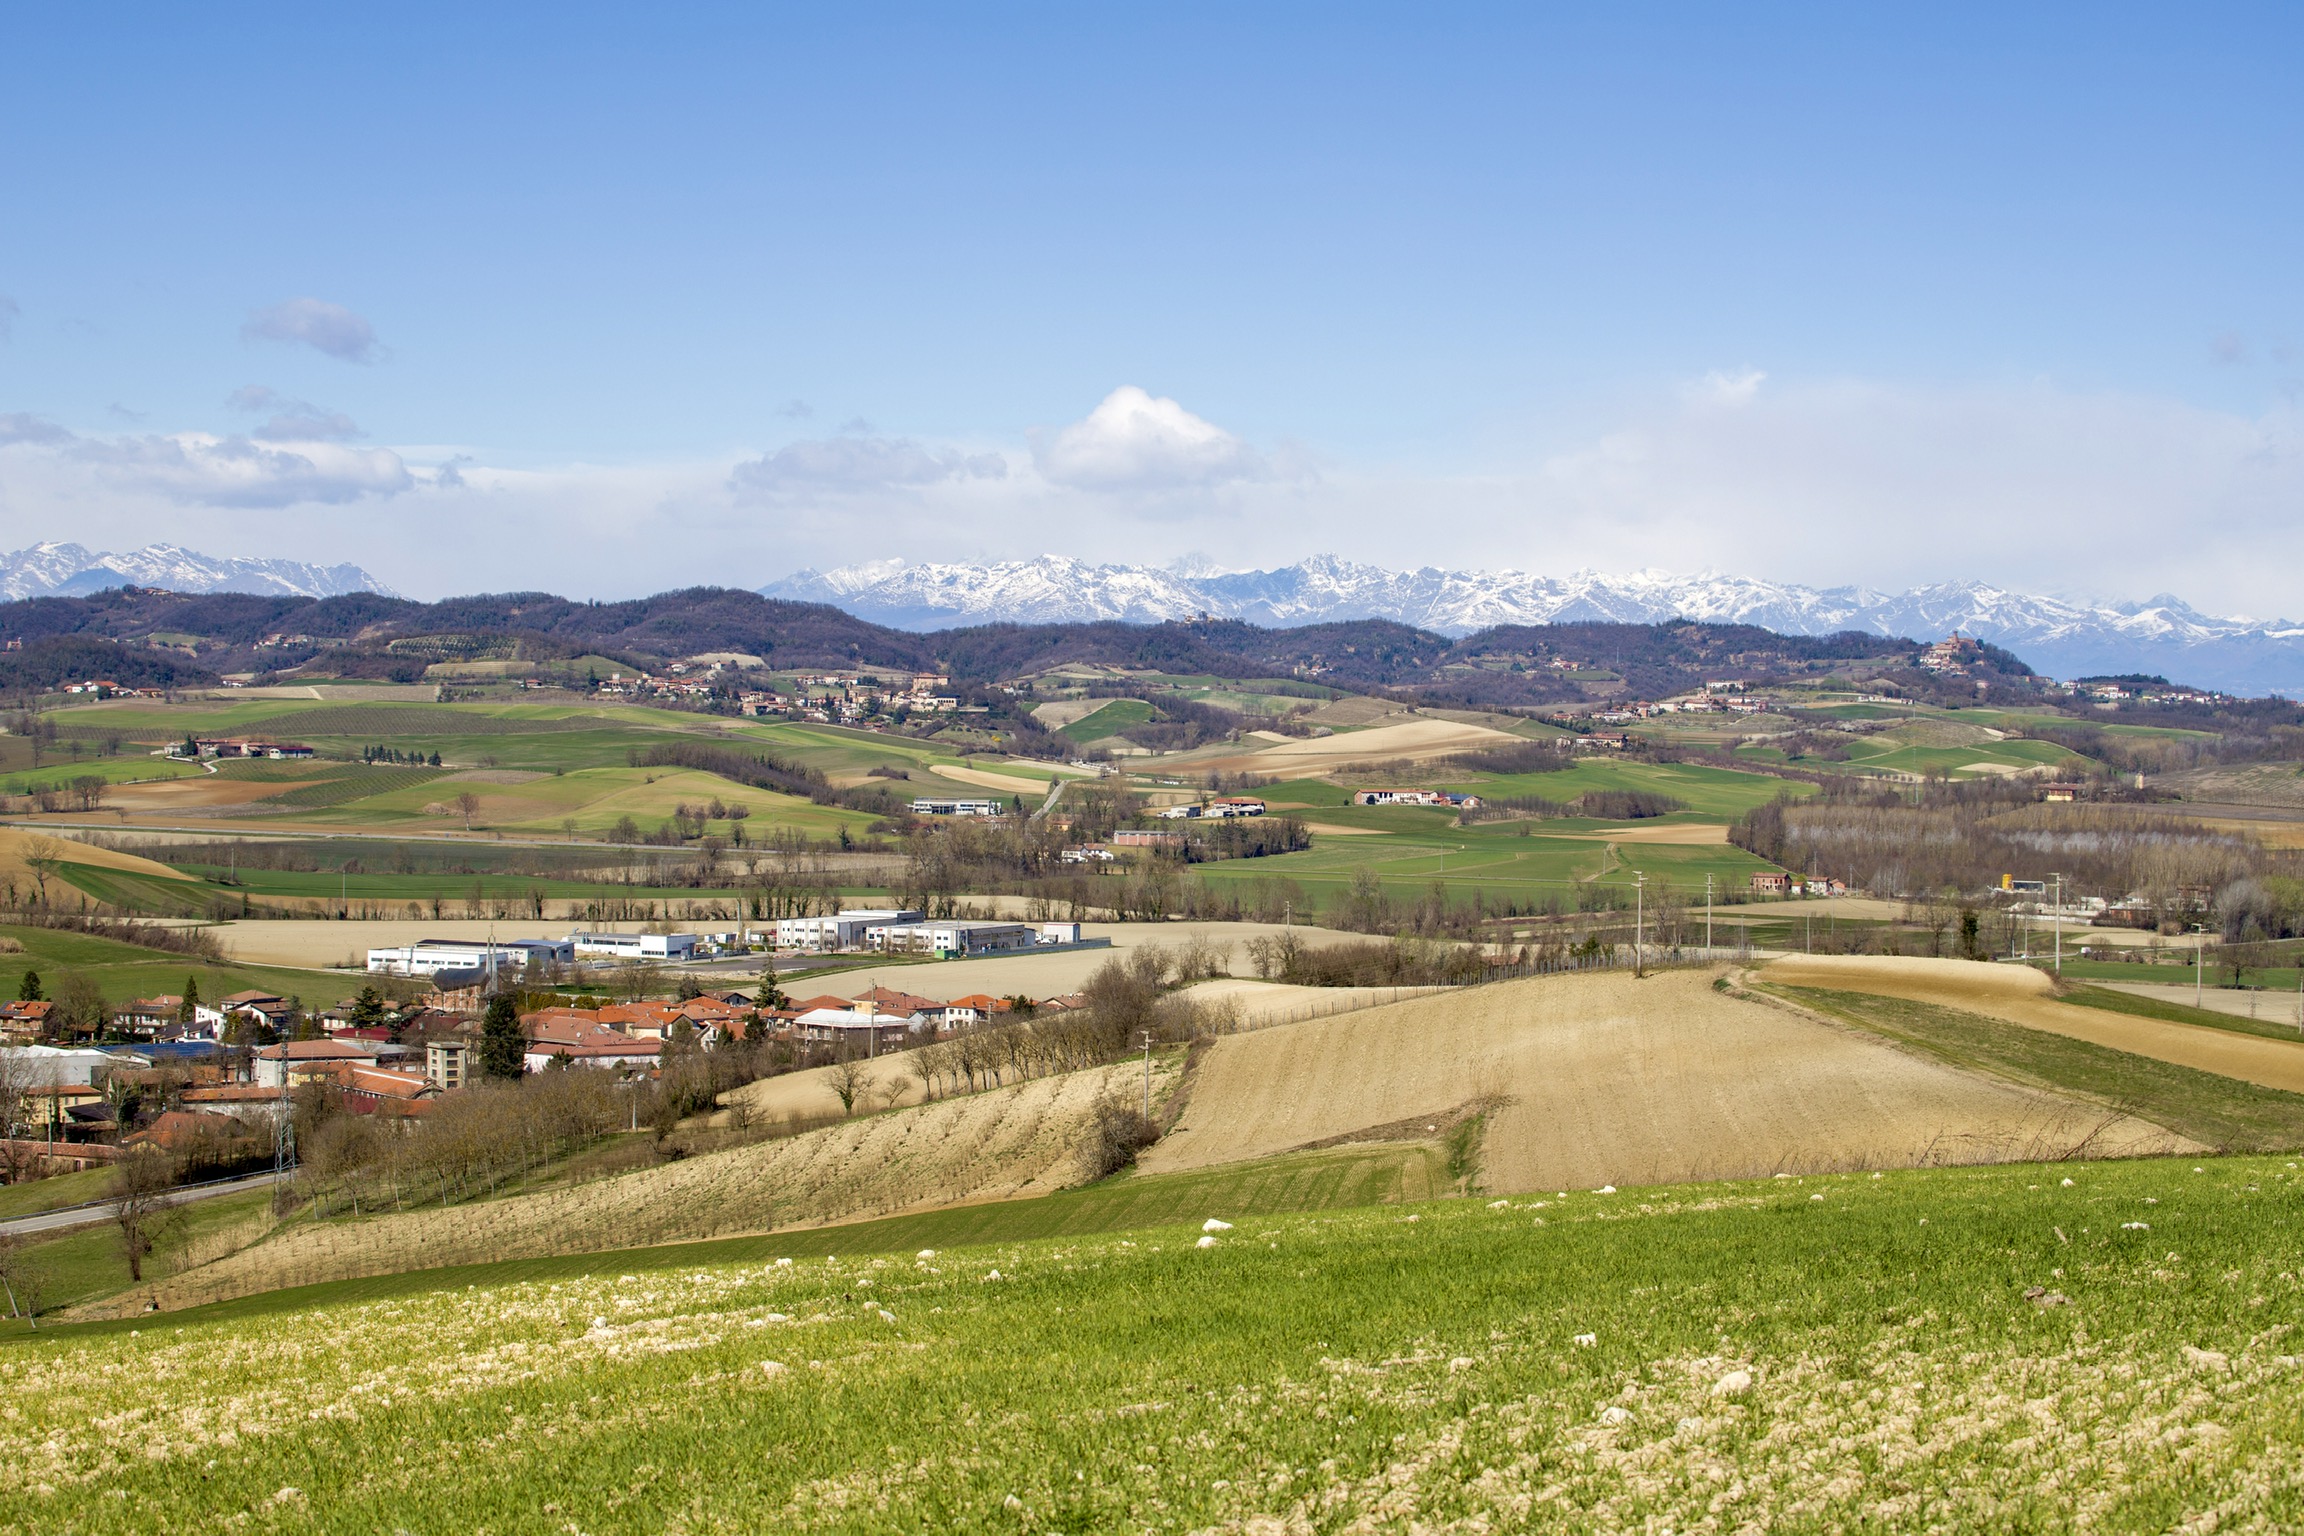 From Monferrato Casalese to the Alps...